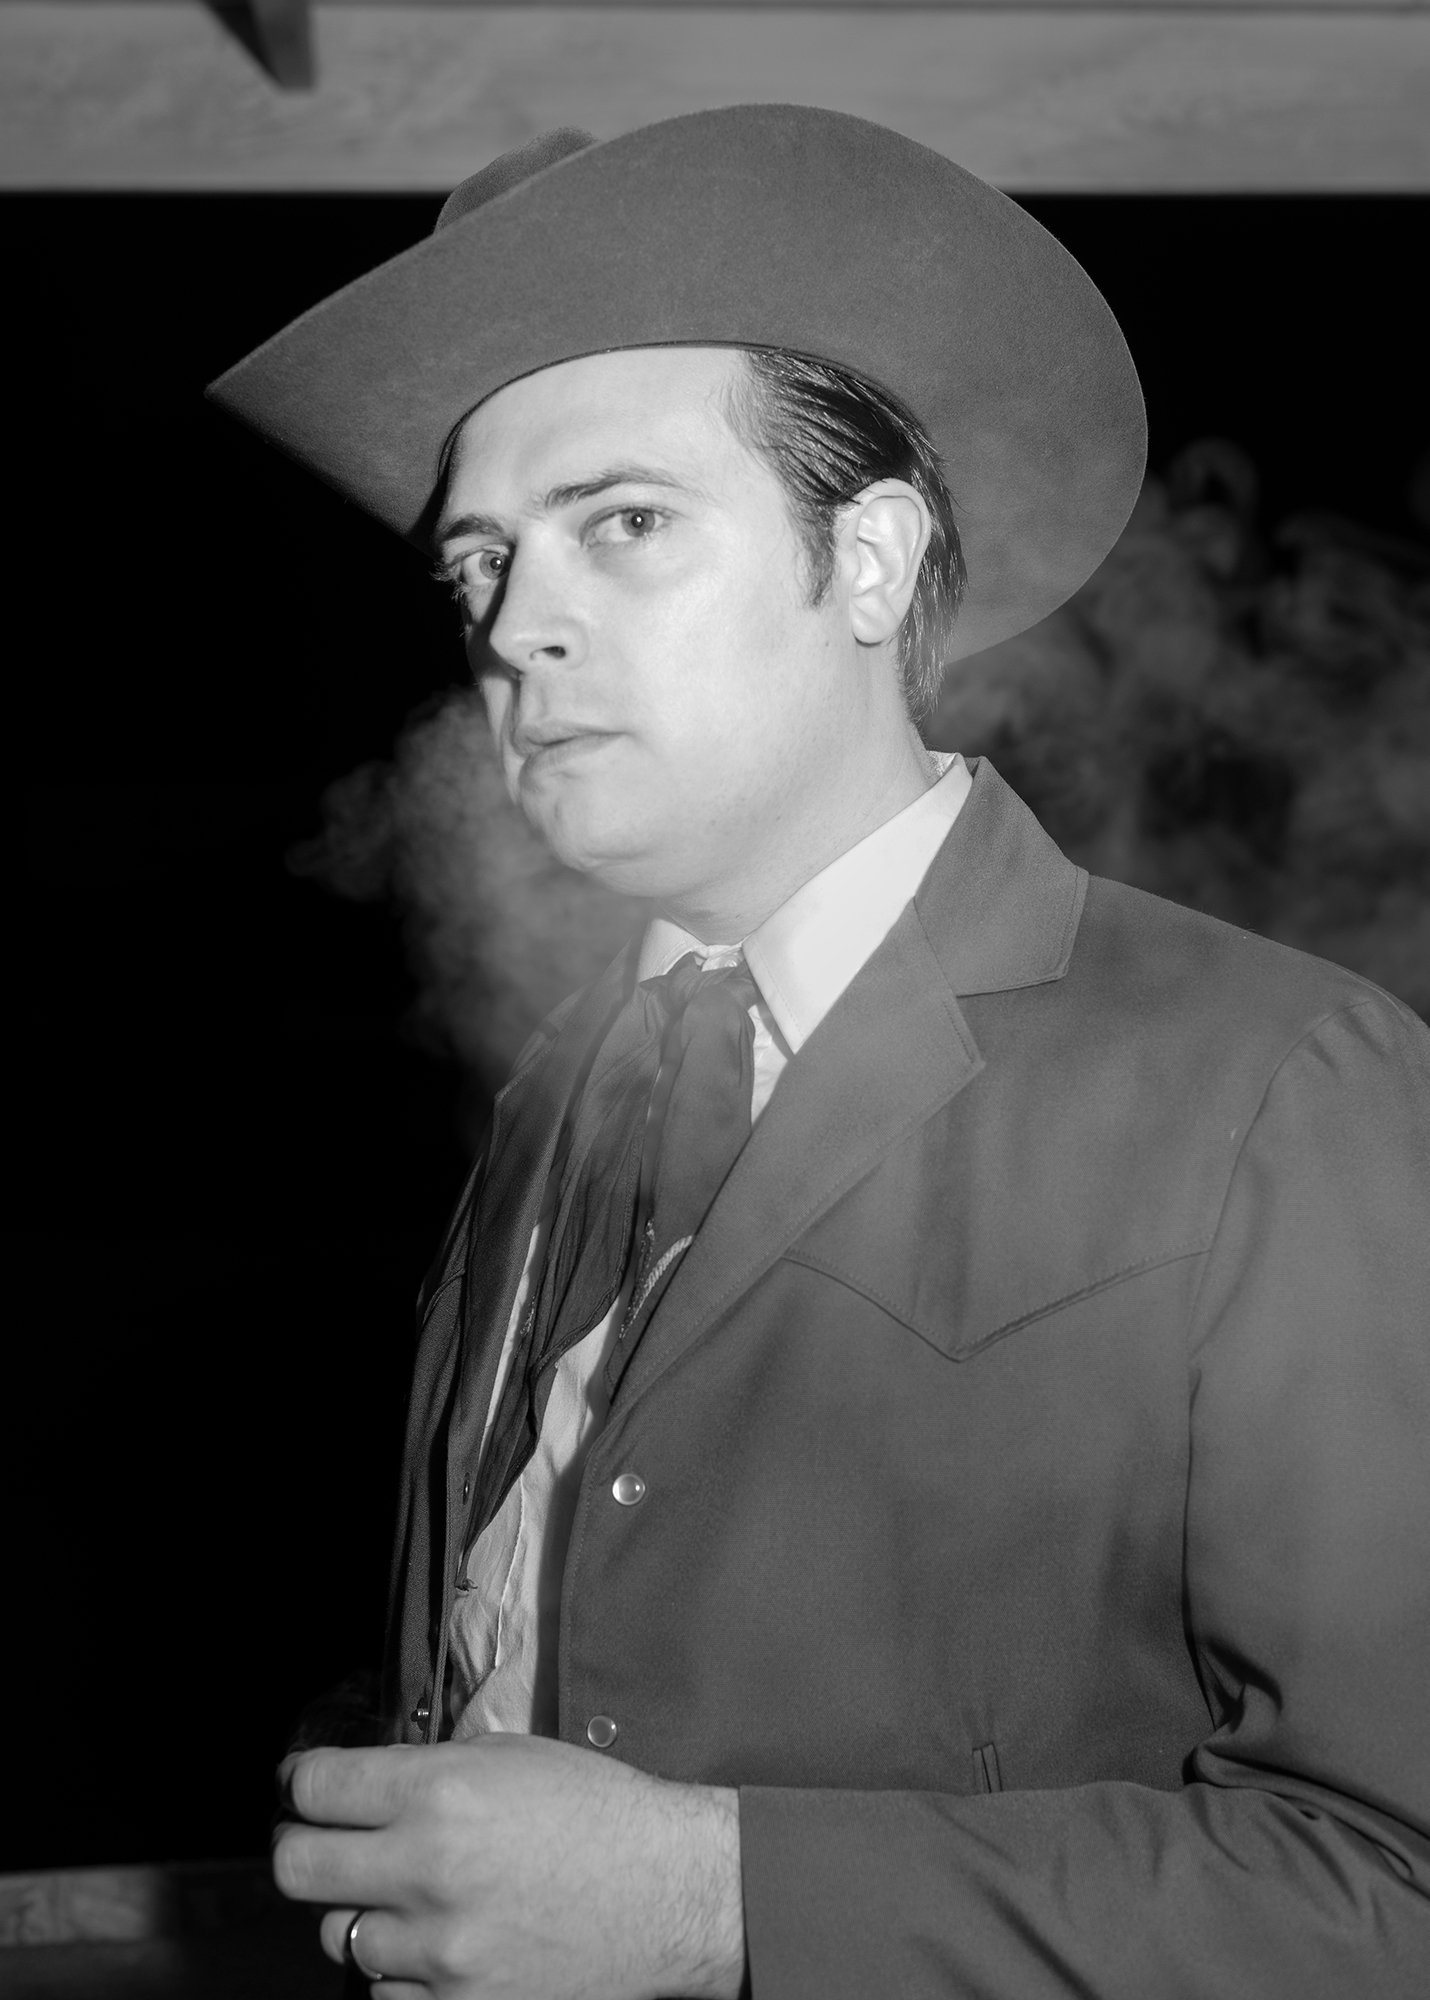 A portrait of a person with short slicked back hair underneath a suede hat with a large brim, surrounded by a little fog near the mouth.